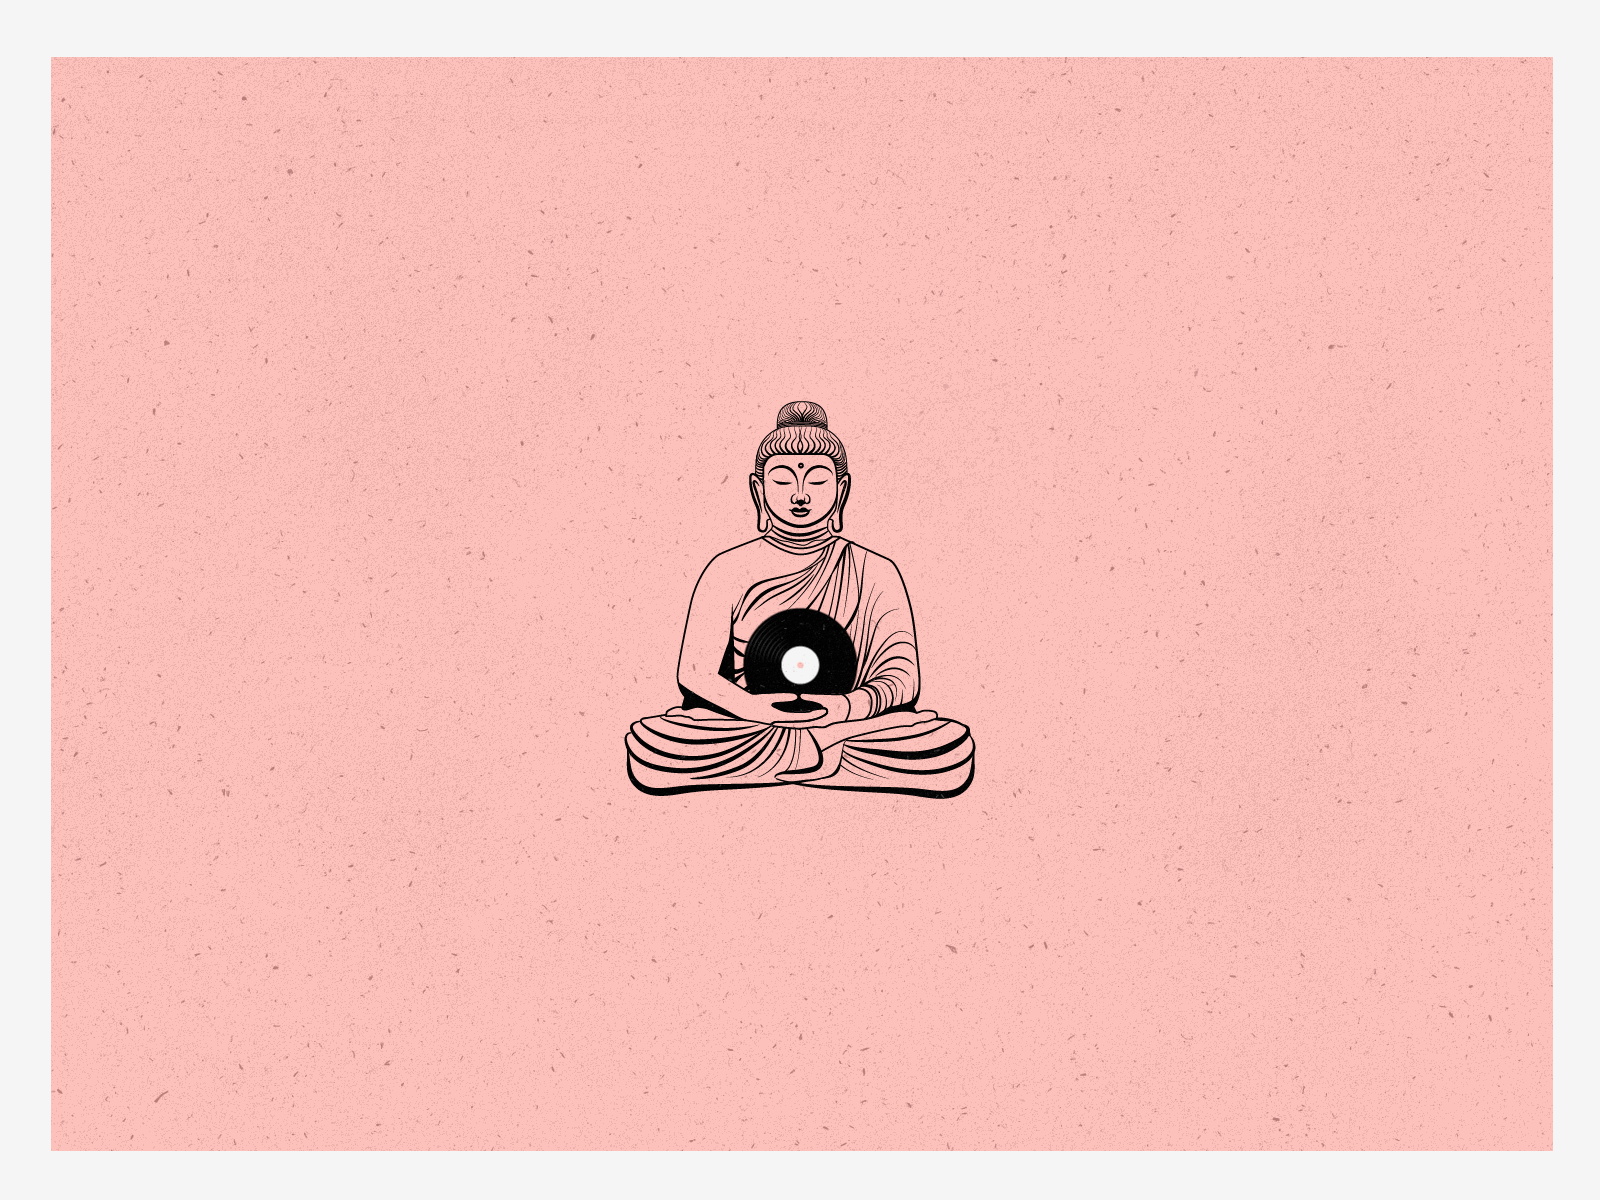 Buddha statue with a vinyl record floating up and down